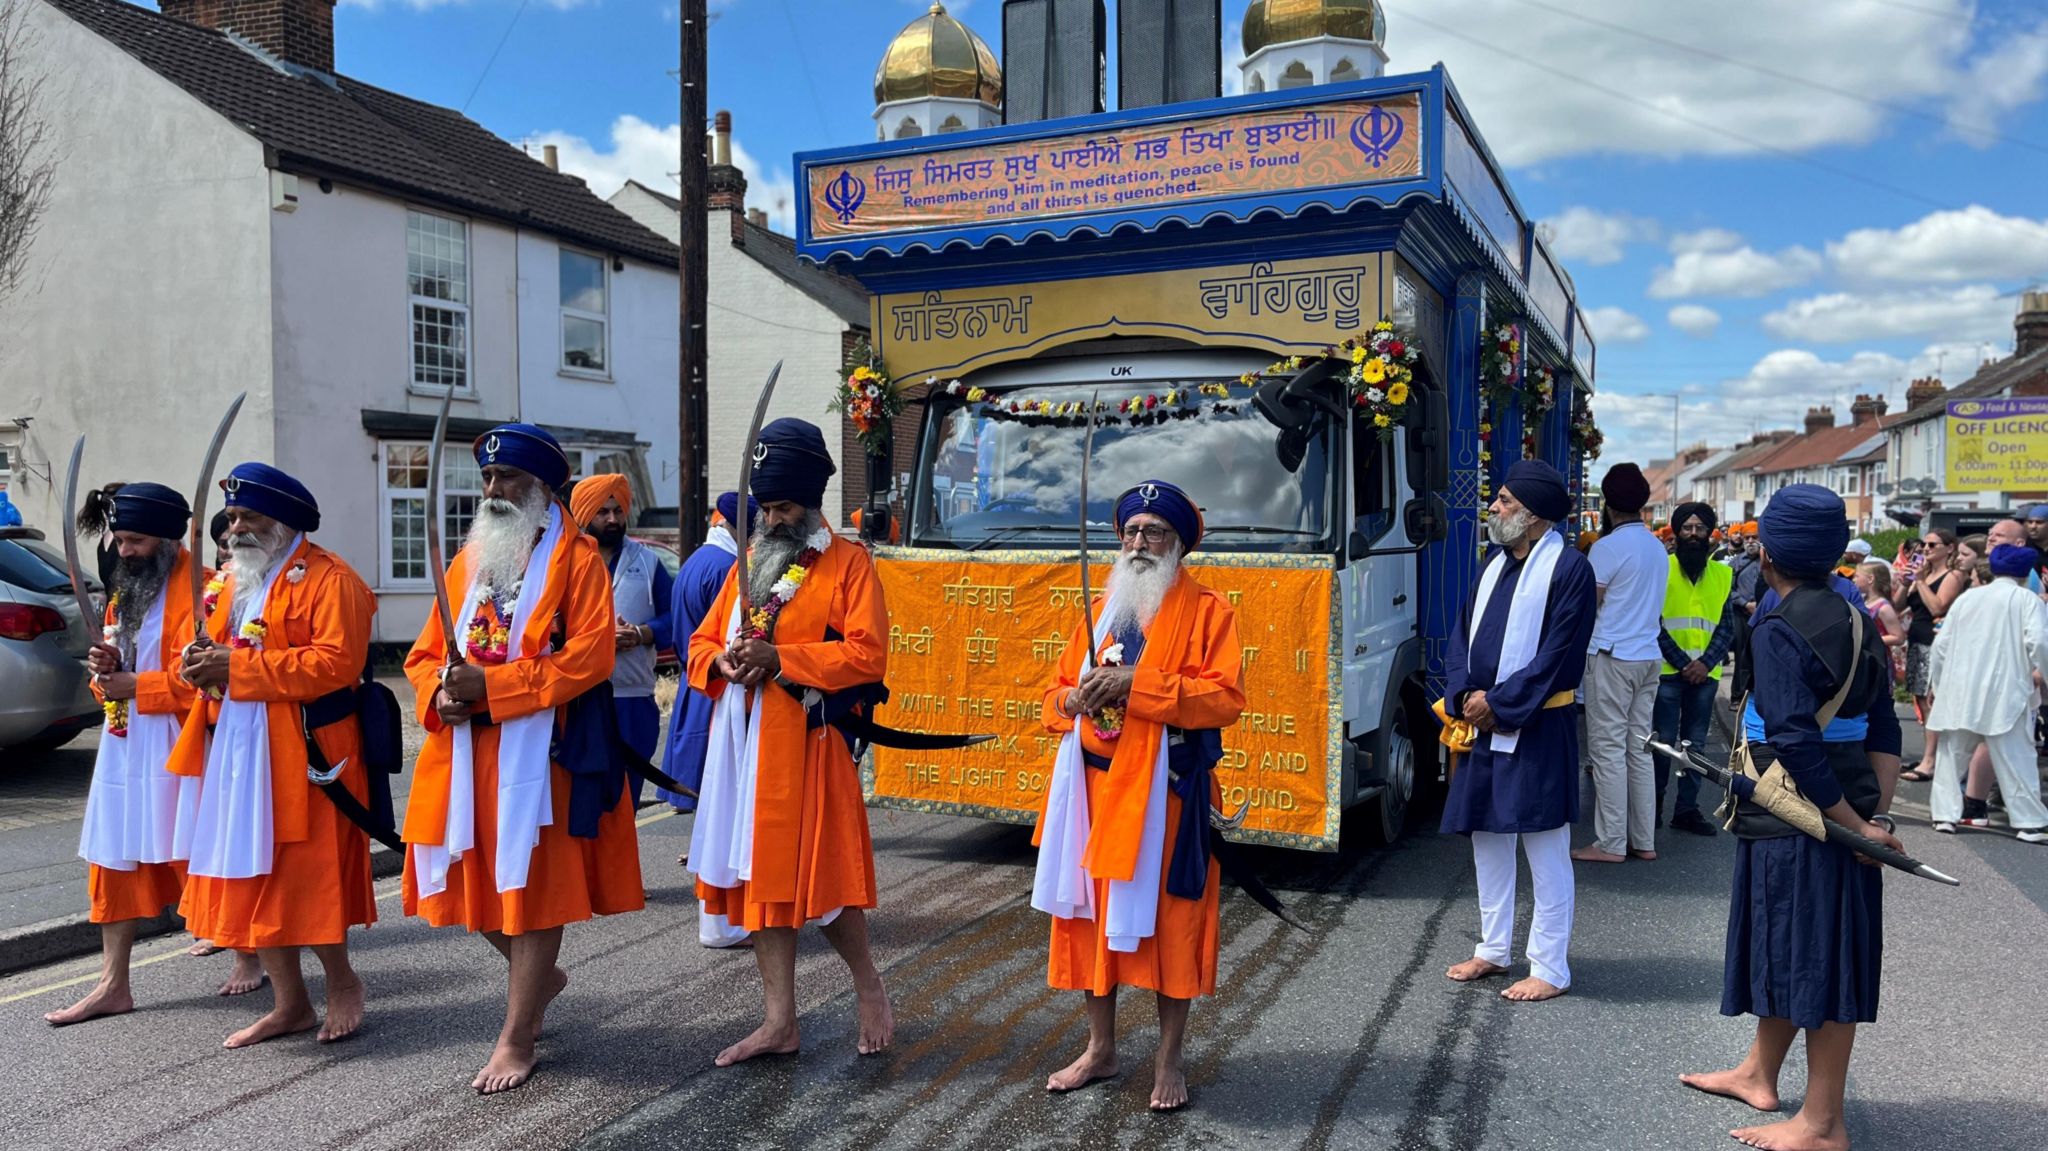 Five men in orange robes and purple turbans, carring swords in front of them, lead a procession float